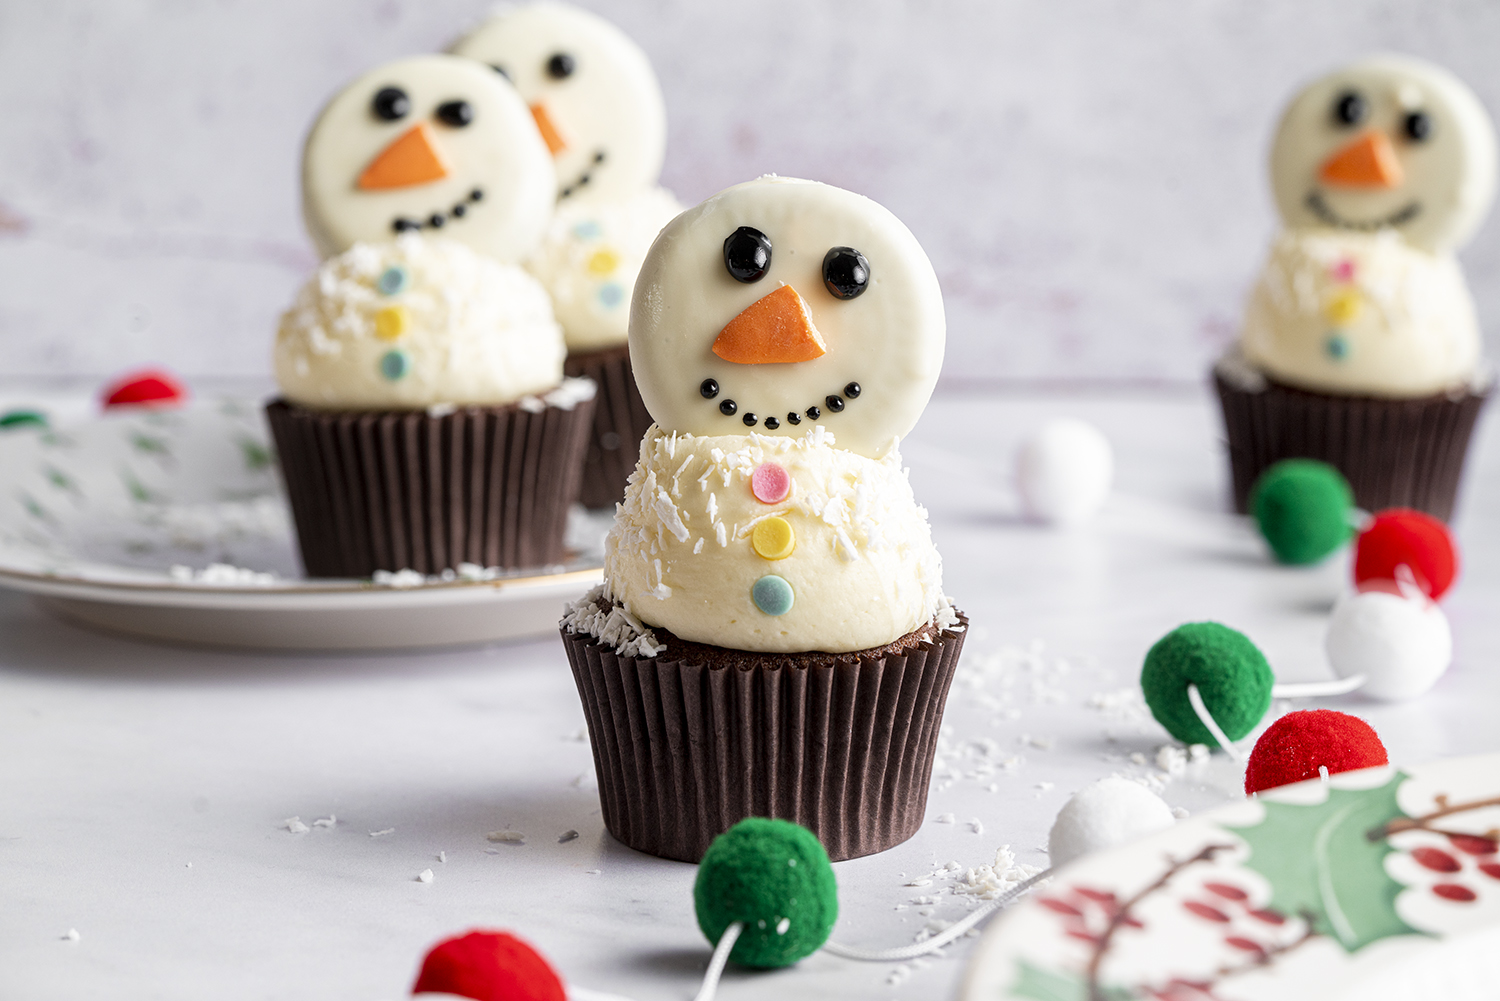 Cake Snowman Recipe: How to Make It